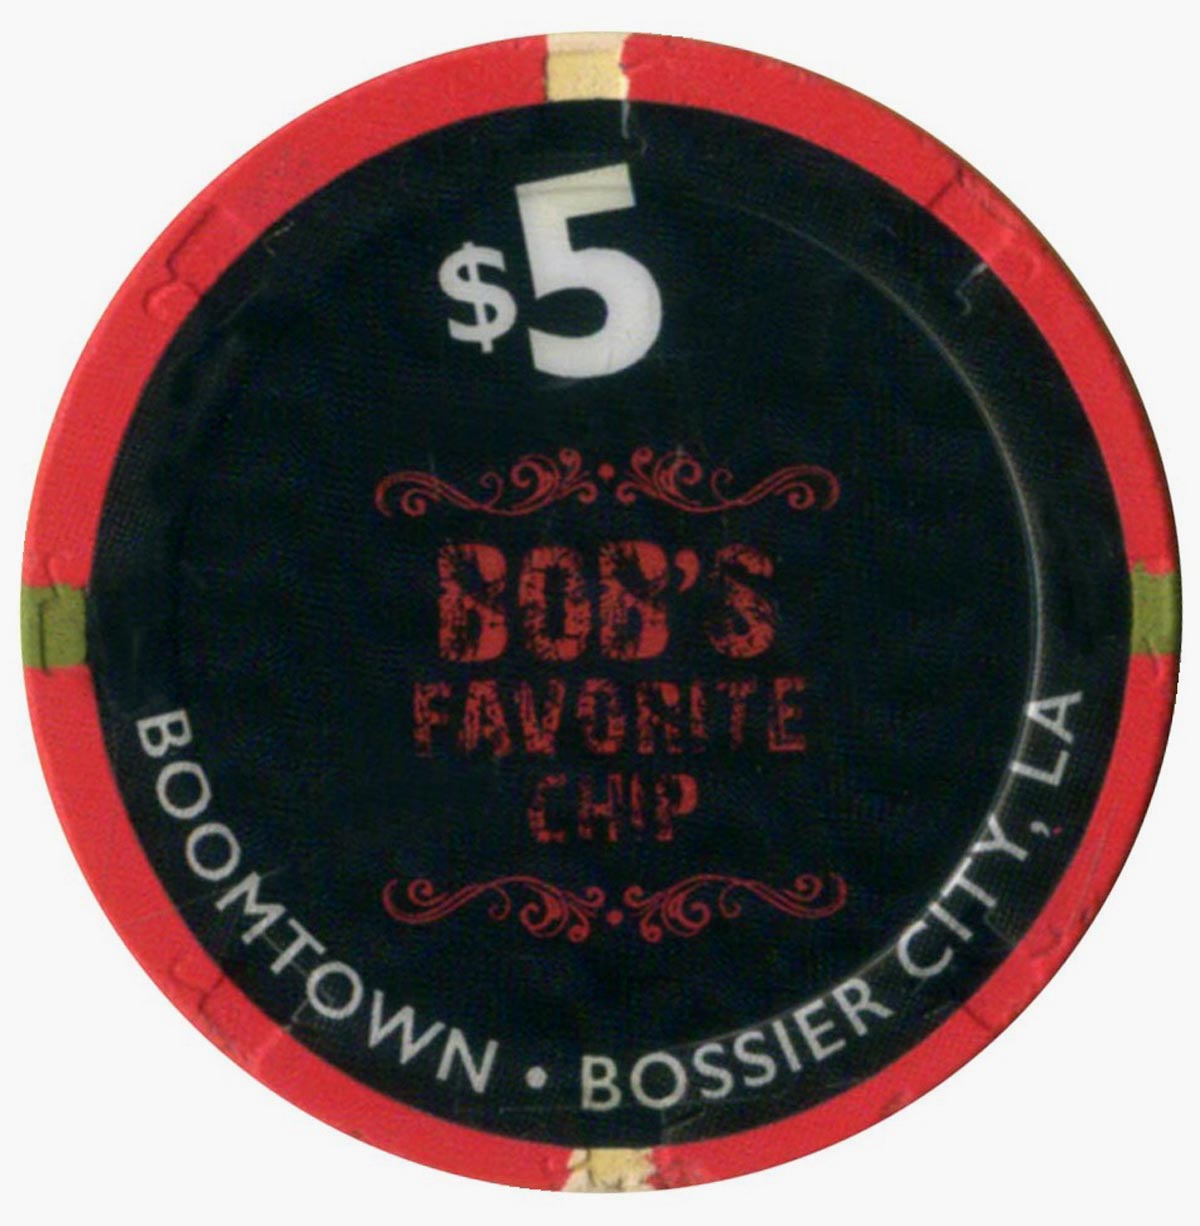 boomtown hotel and casino new orleans